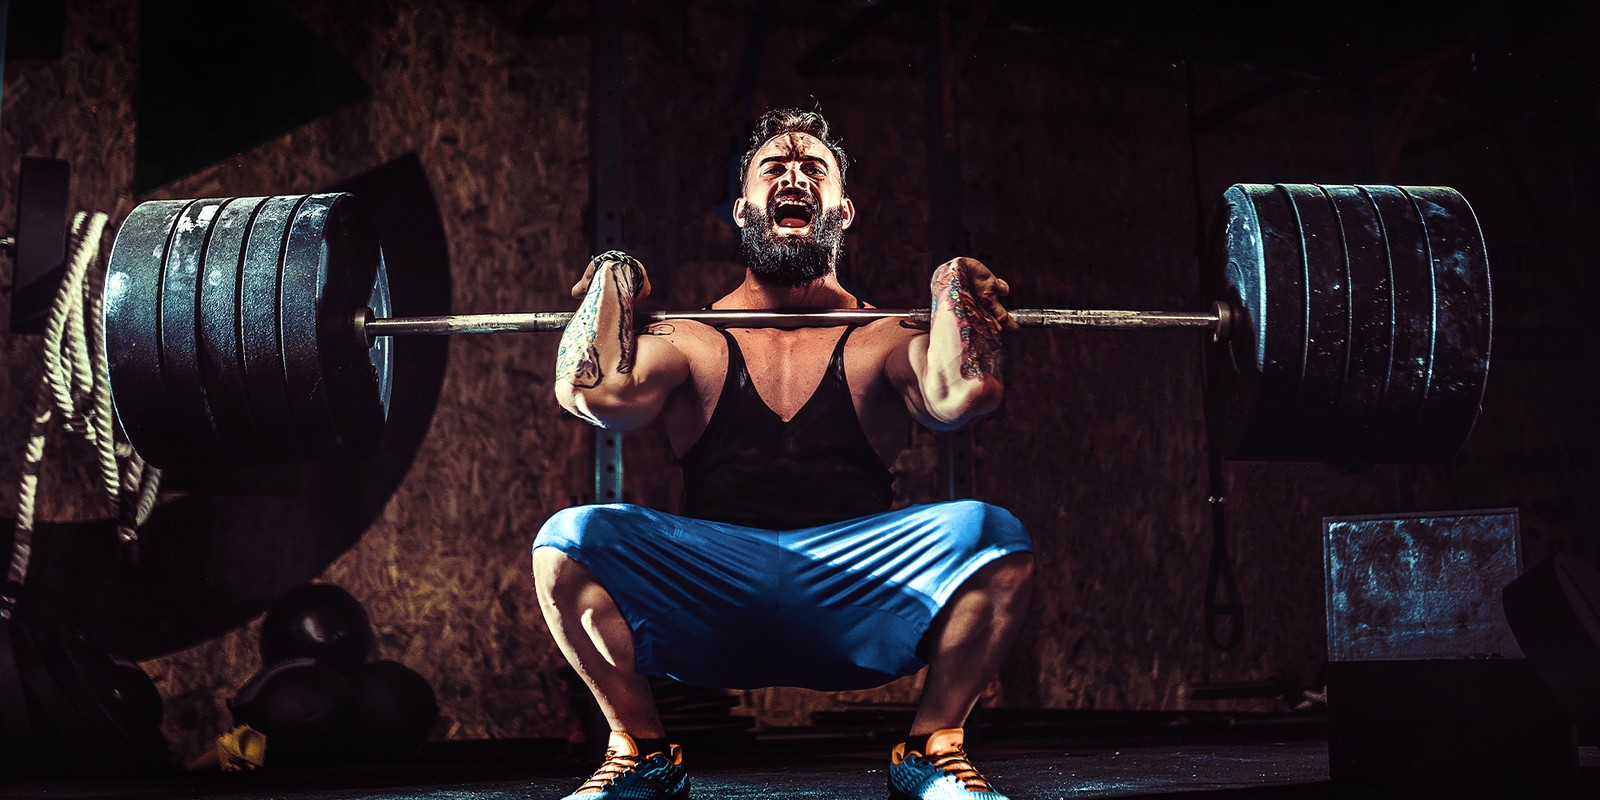 Weight lifting vs. bodybuilding: which one is right for you?